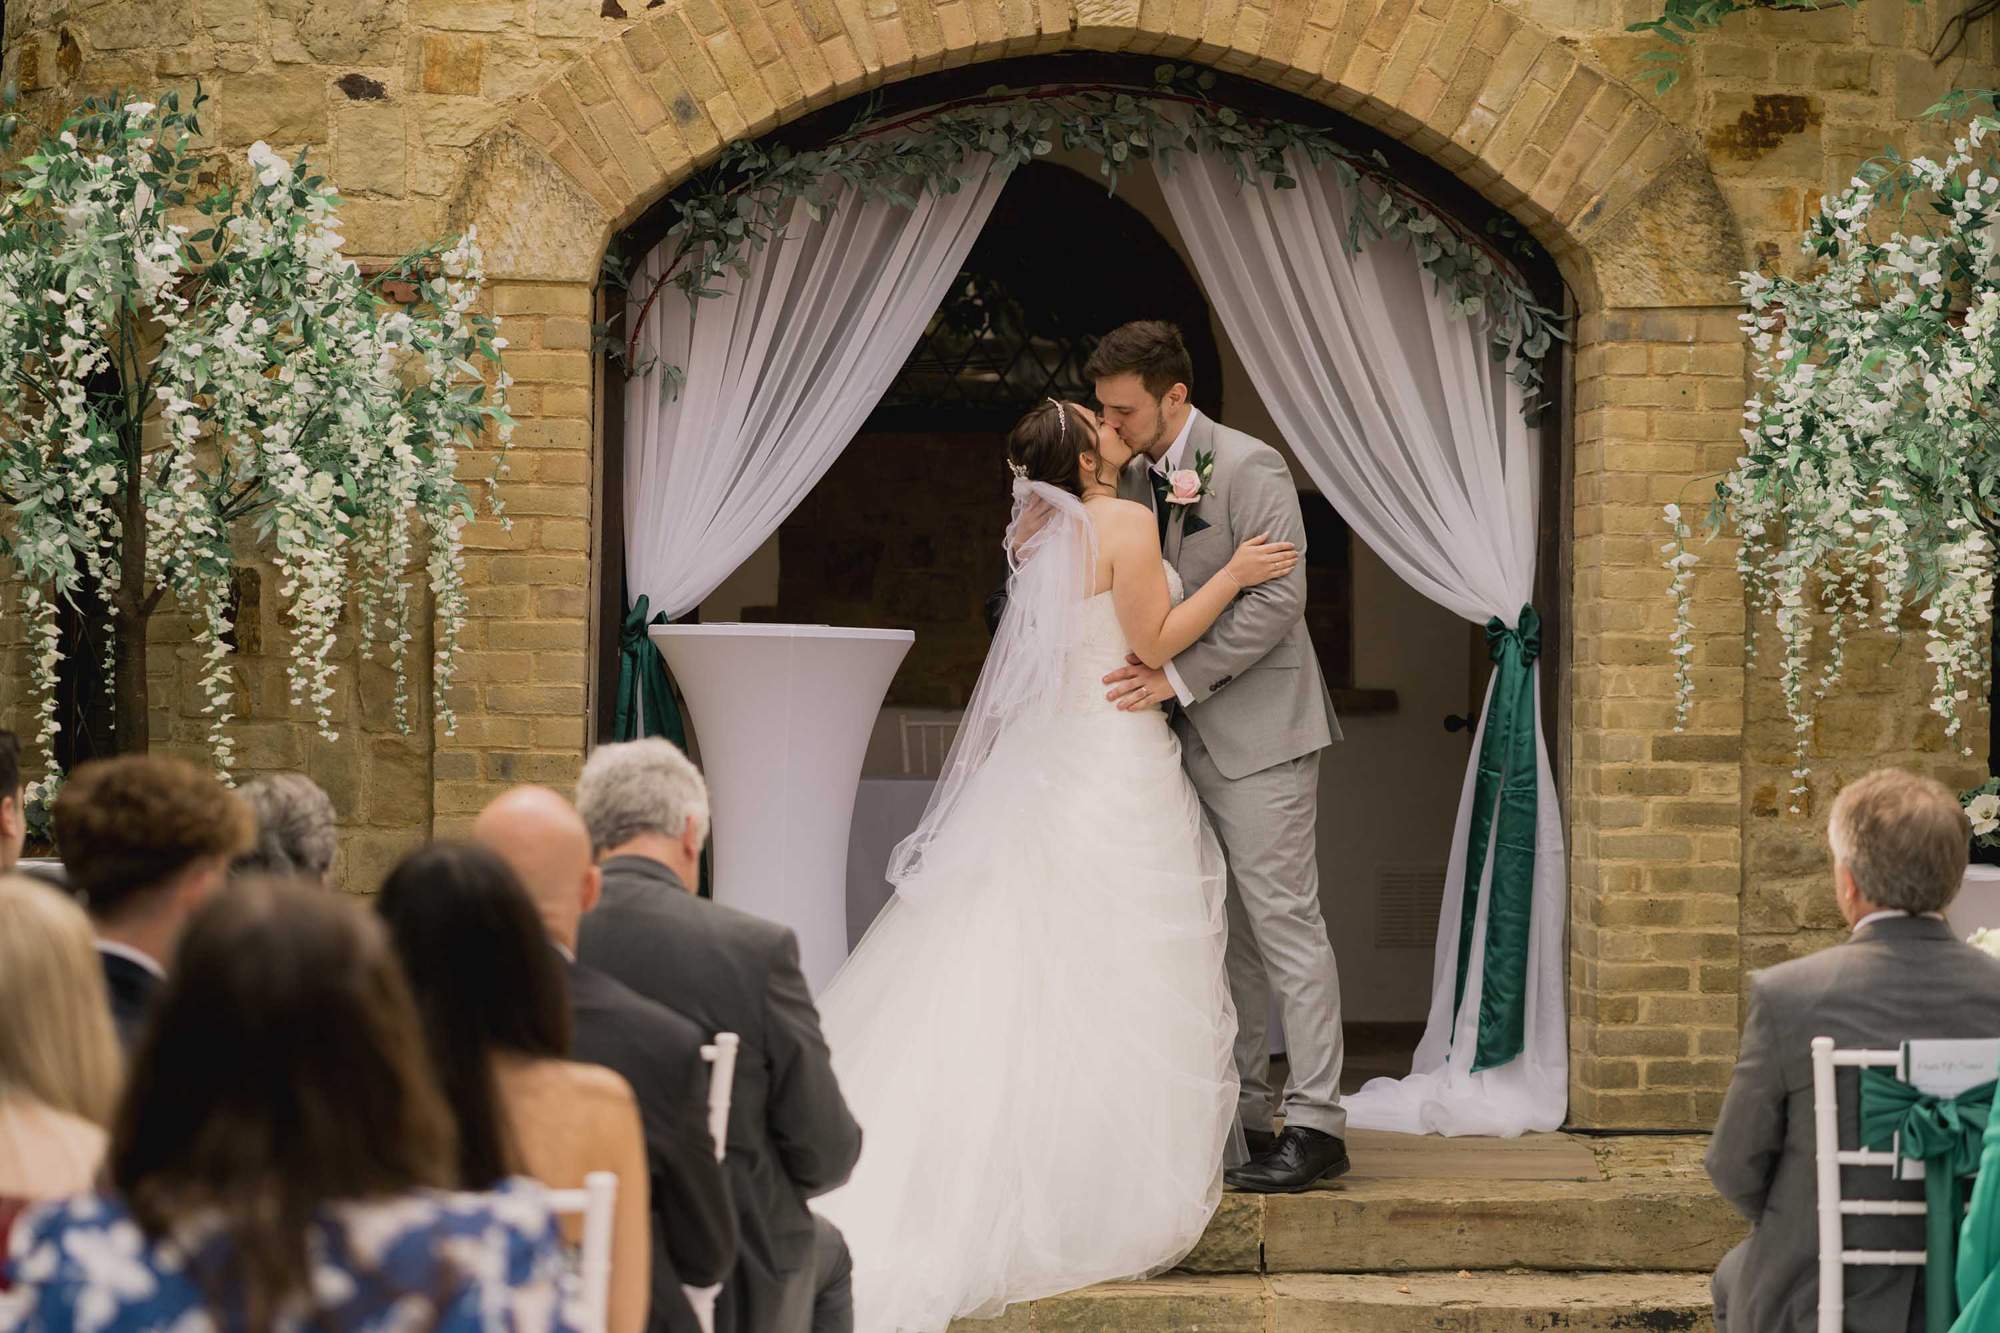 Bride and groom have their first kiss as man and wife at the Ravenswood Hotel in Sussex.